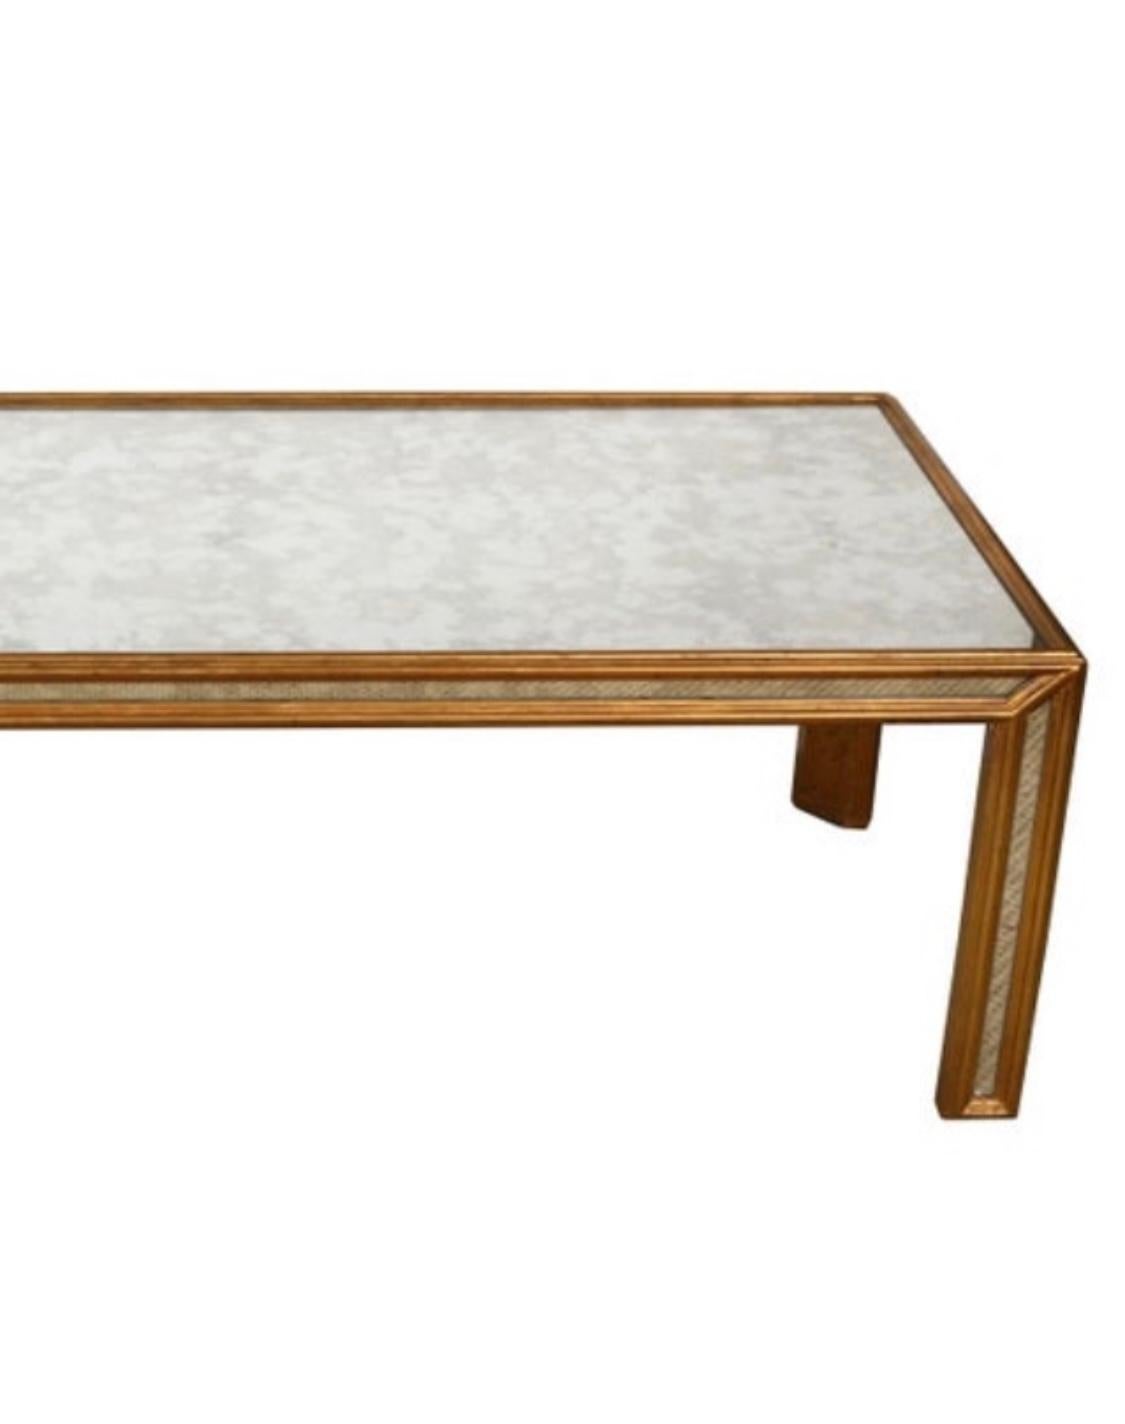 Contemporary Elegant Gilt and Mirrored Glass Coffee Table by Bernhardt For Sale